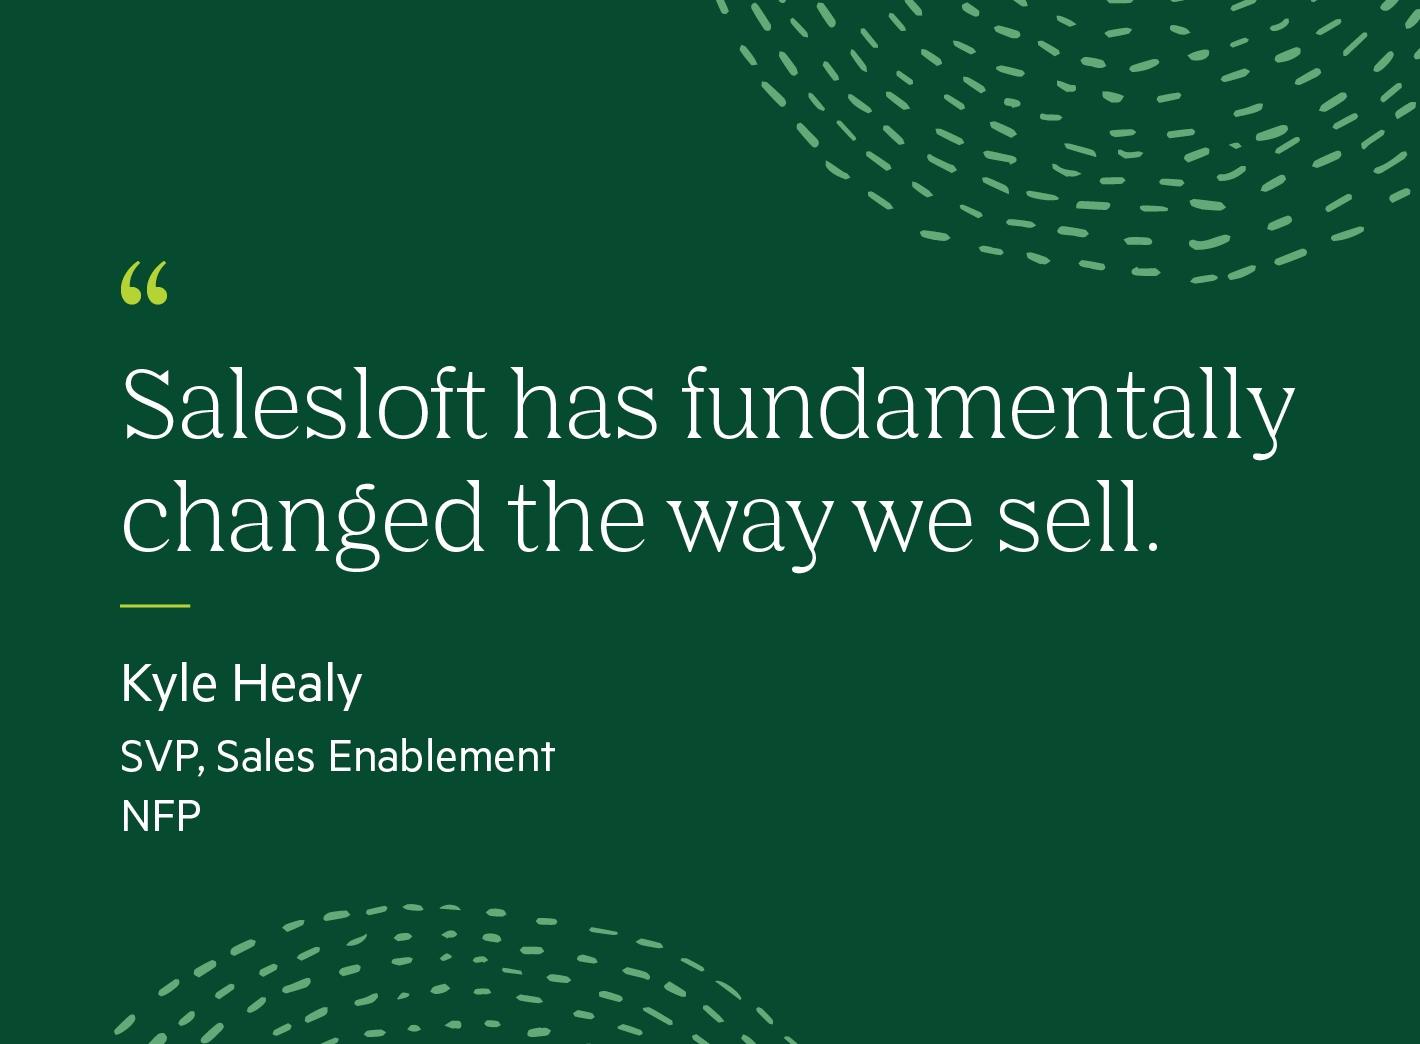 "Salesloft has fundamentally changed the way we sell"